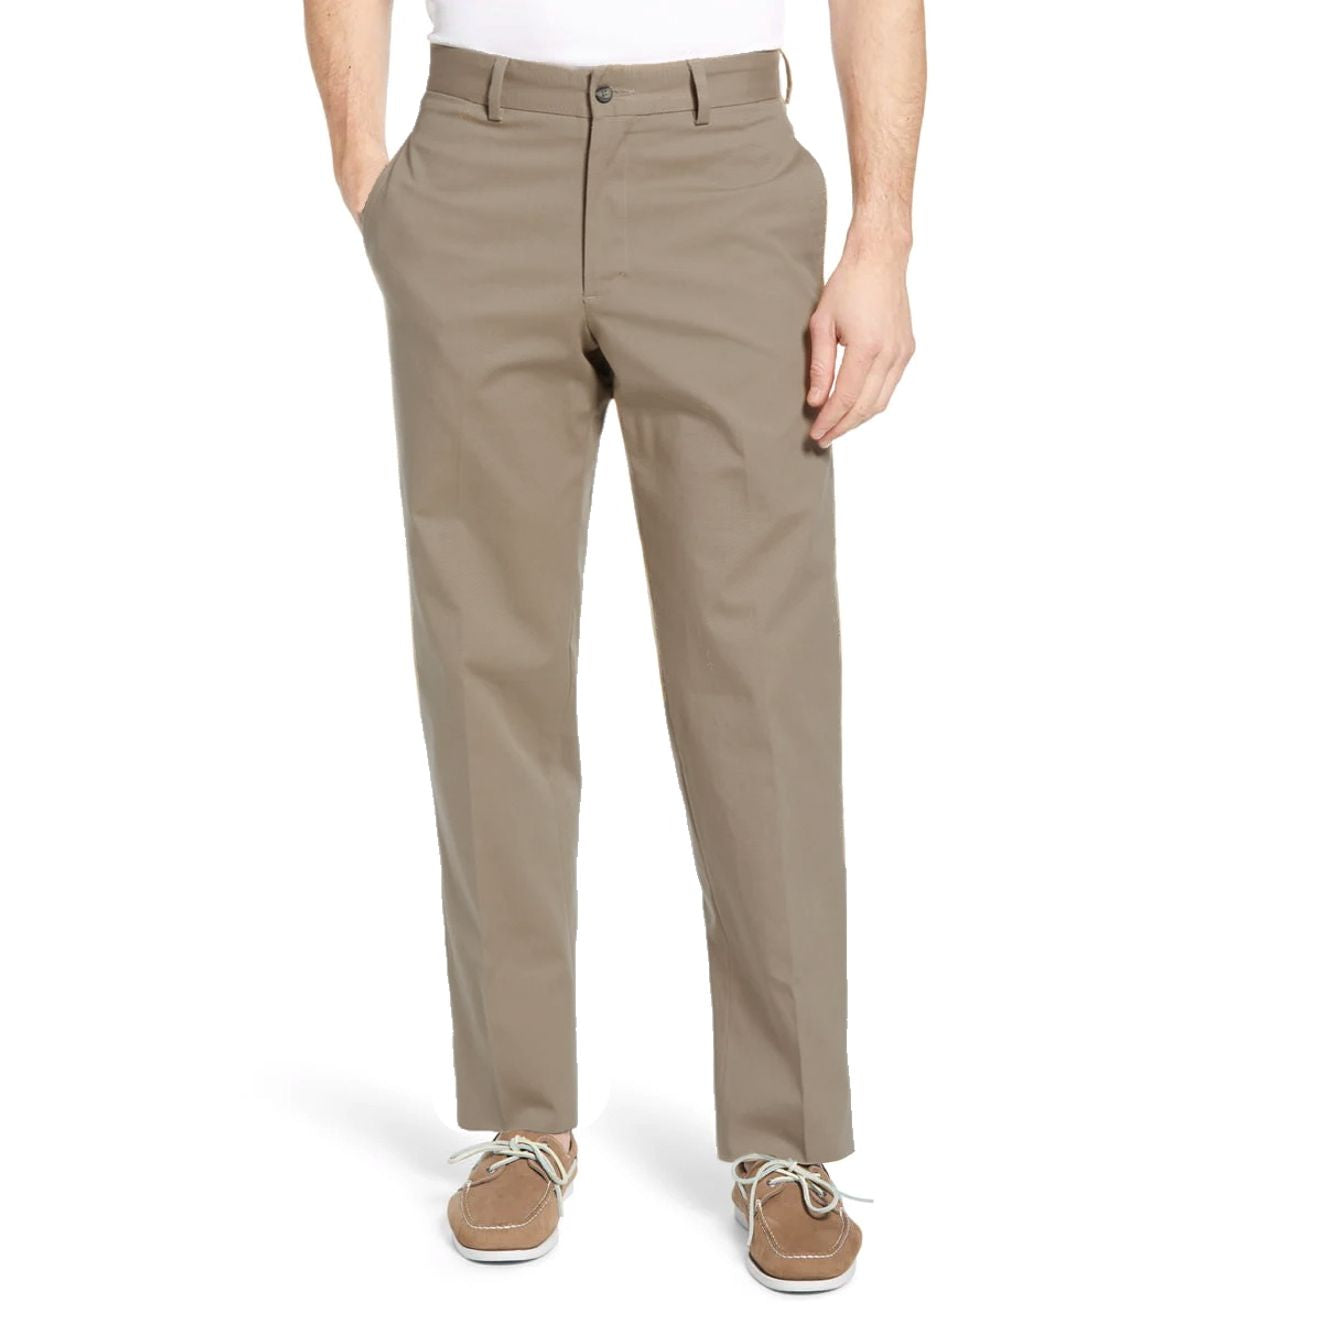 Stretch Canvas Pant in Khaki (Sumpter Flat Front) by Charleston Khakis